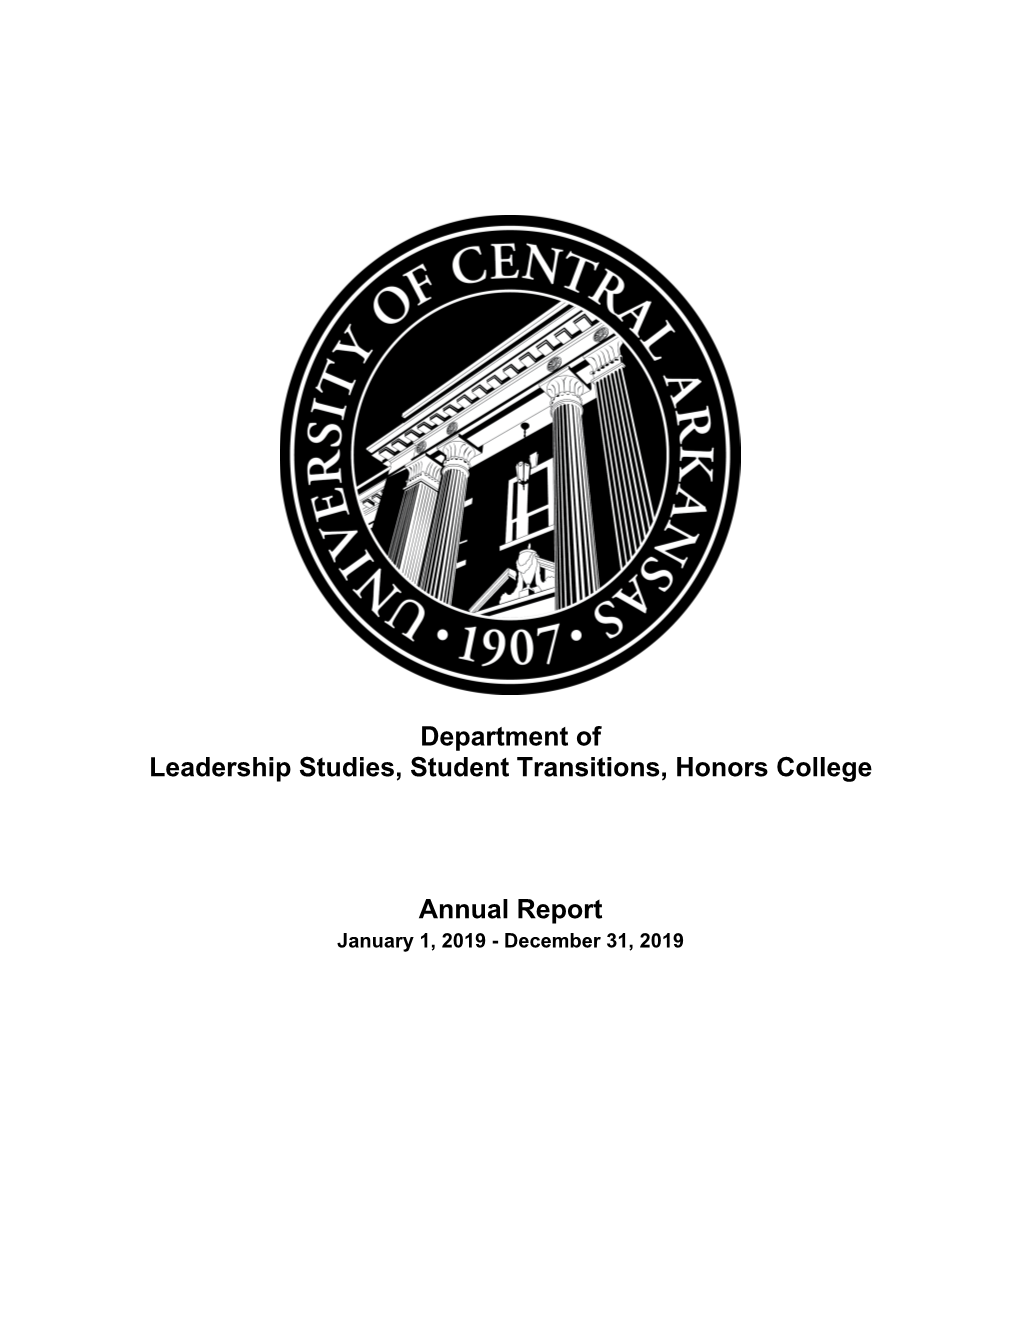 Leadership Studies, Student Transitions, Honors College